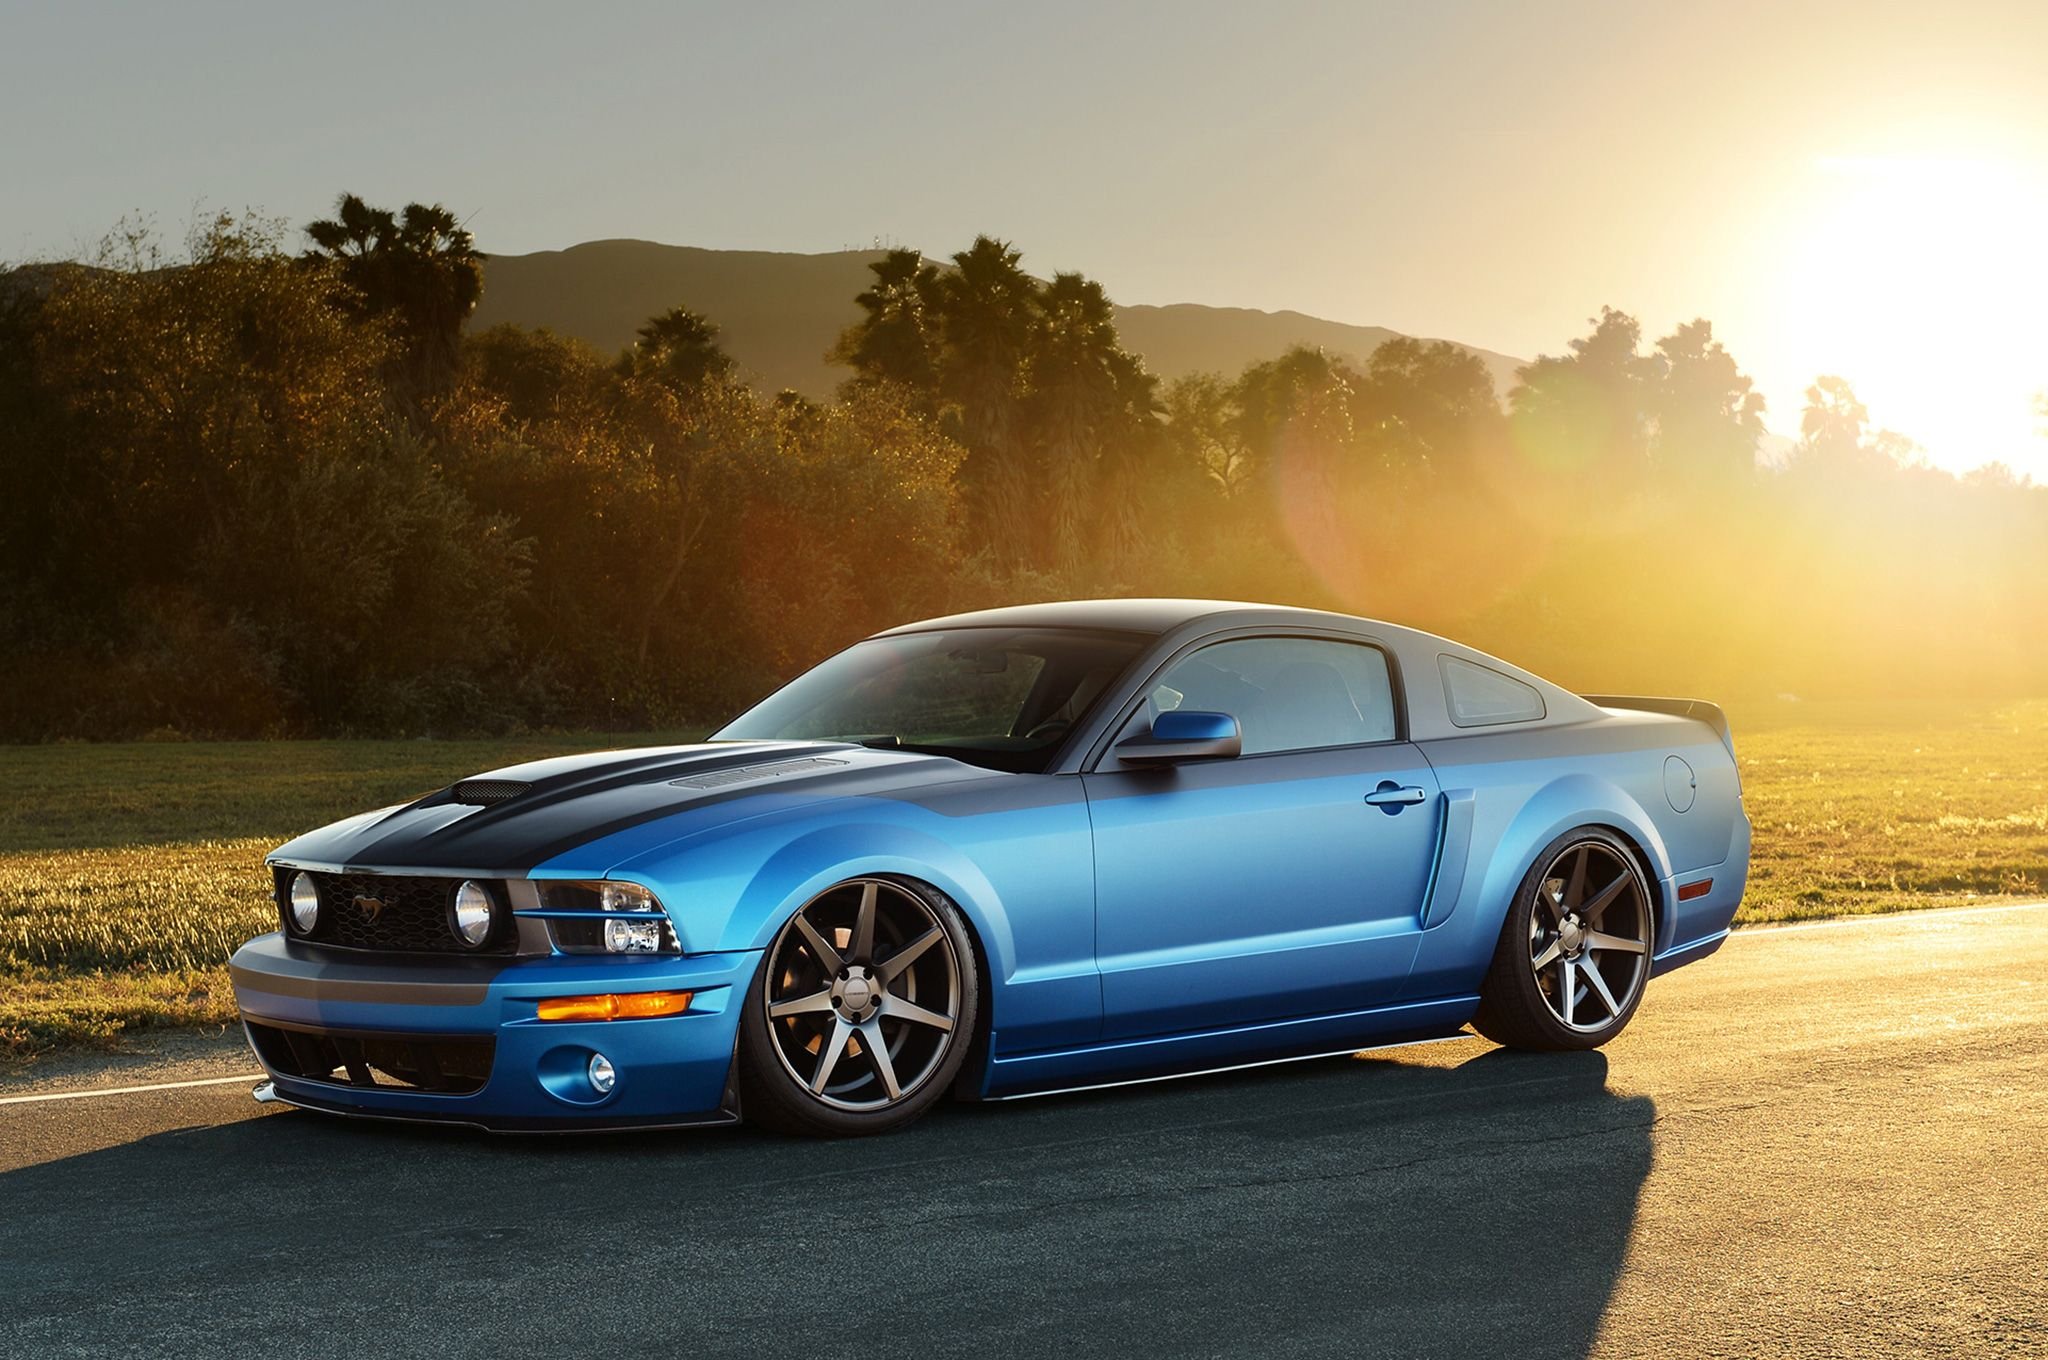 2005, Mustang, Gt, Ford, Blue, Modified, Cars Wallpapers HD / Desktop